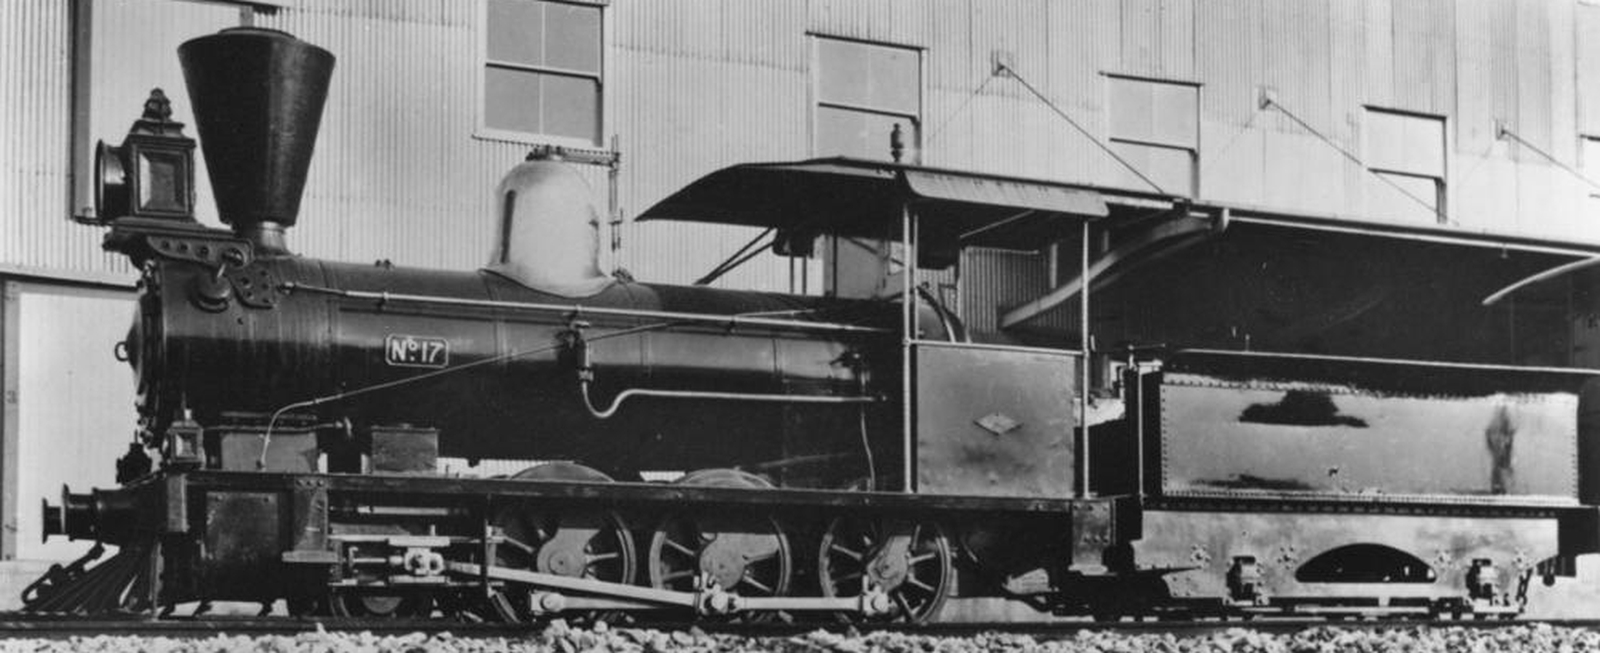 No. 17 displayed in 1914 to commemorate the 50th anniversary of Queensland Railways